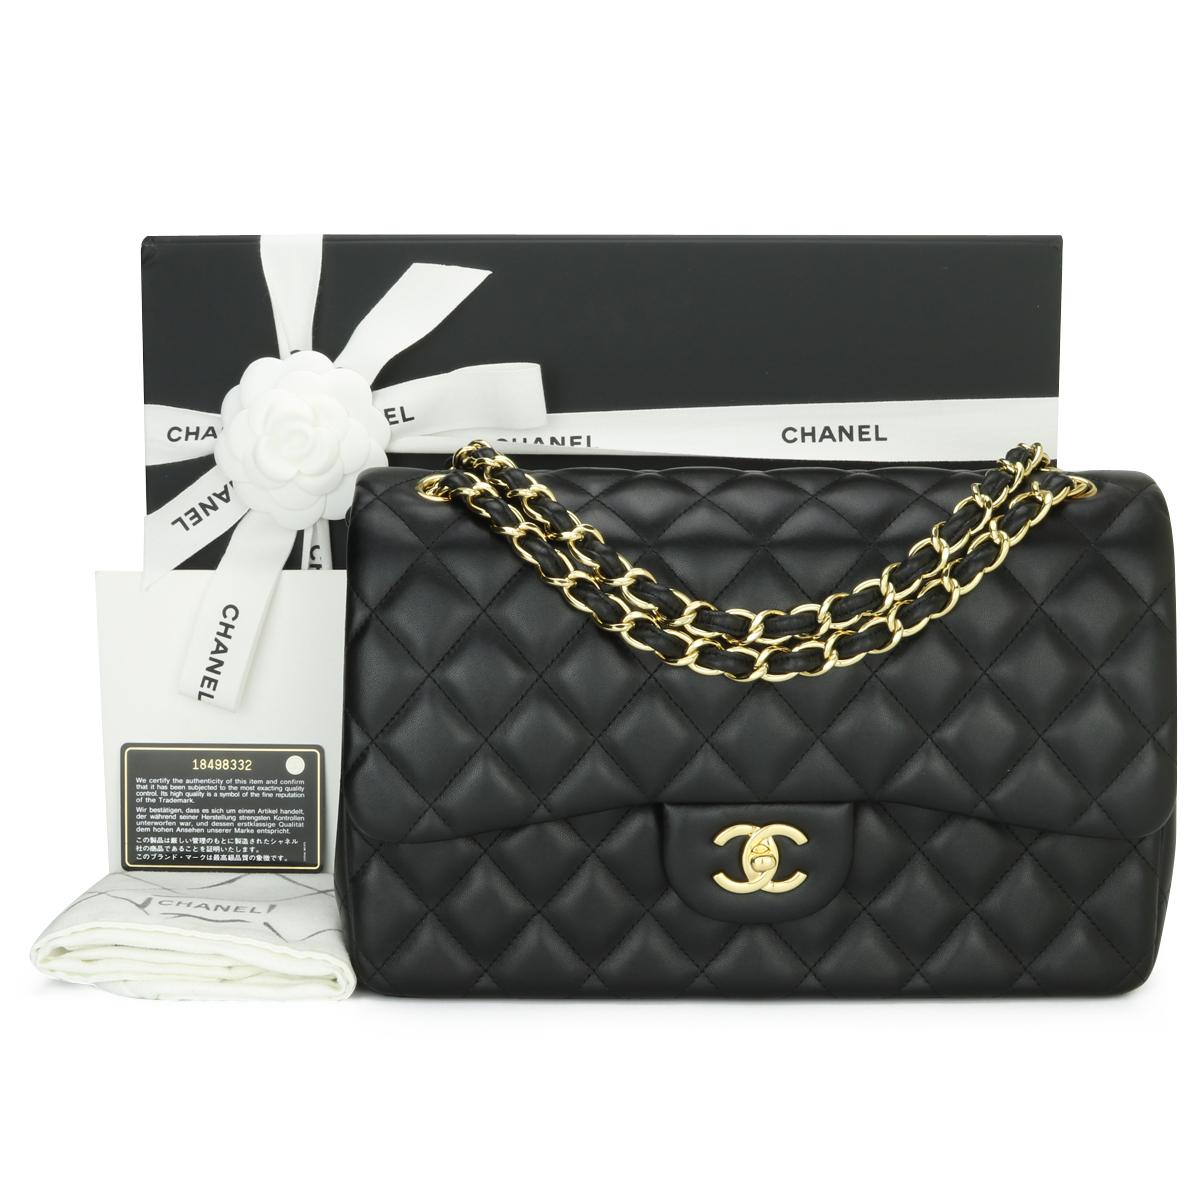 CHANEL Classic Double Flap Jumbo Bag Black Lambskin with Gold Hardware 2014.

This stunning bag is in excellent condition, the bag still holds its original shape, and the hardware is still very shiny. The leather smells fresh as if new.

- Exterior